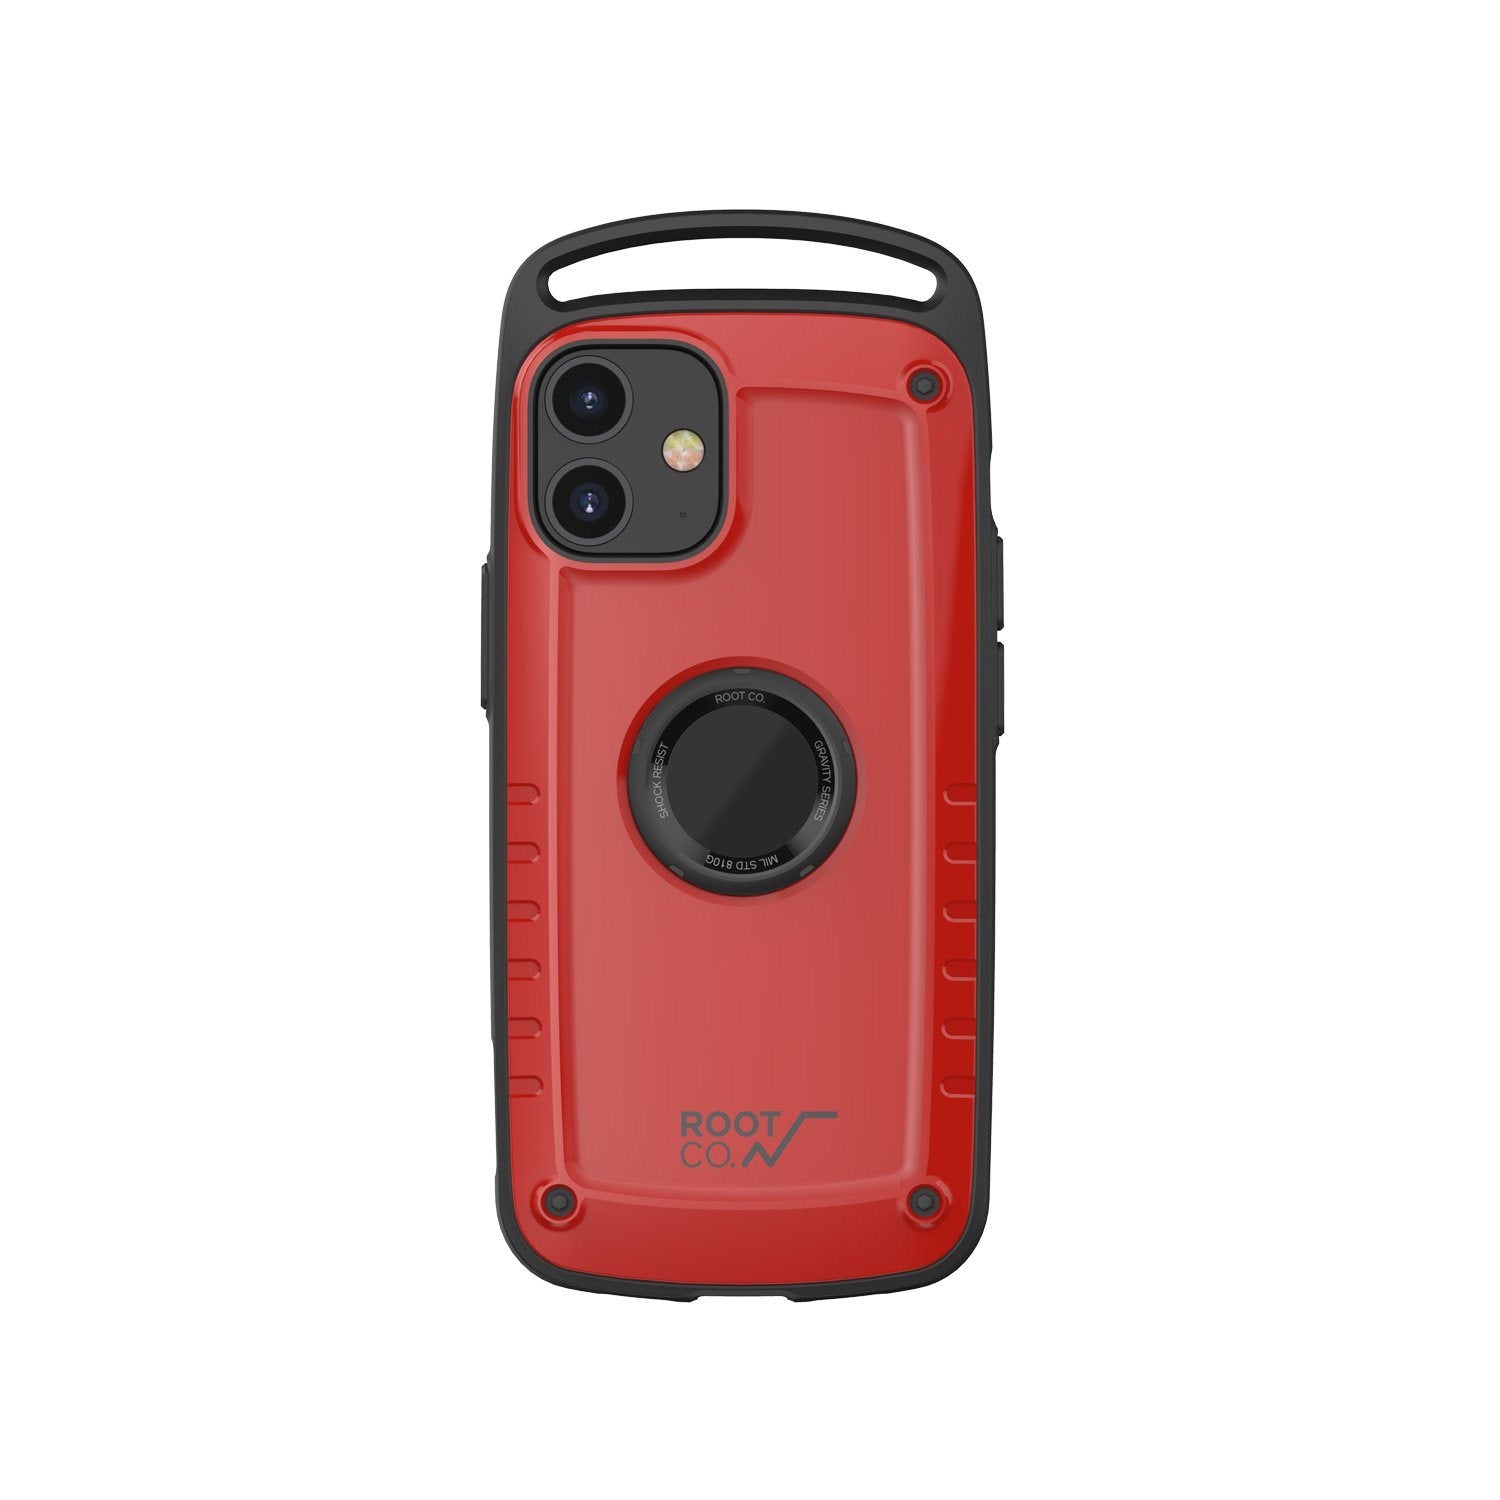 ROOT CO. Gravity Shock Resist Case Pro for iPhone 12 mini 5.4"(2020), Gloss Red Default ROOT CO. 